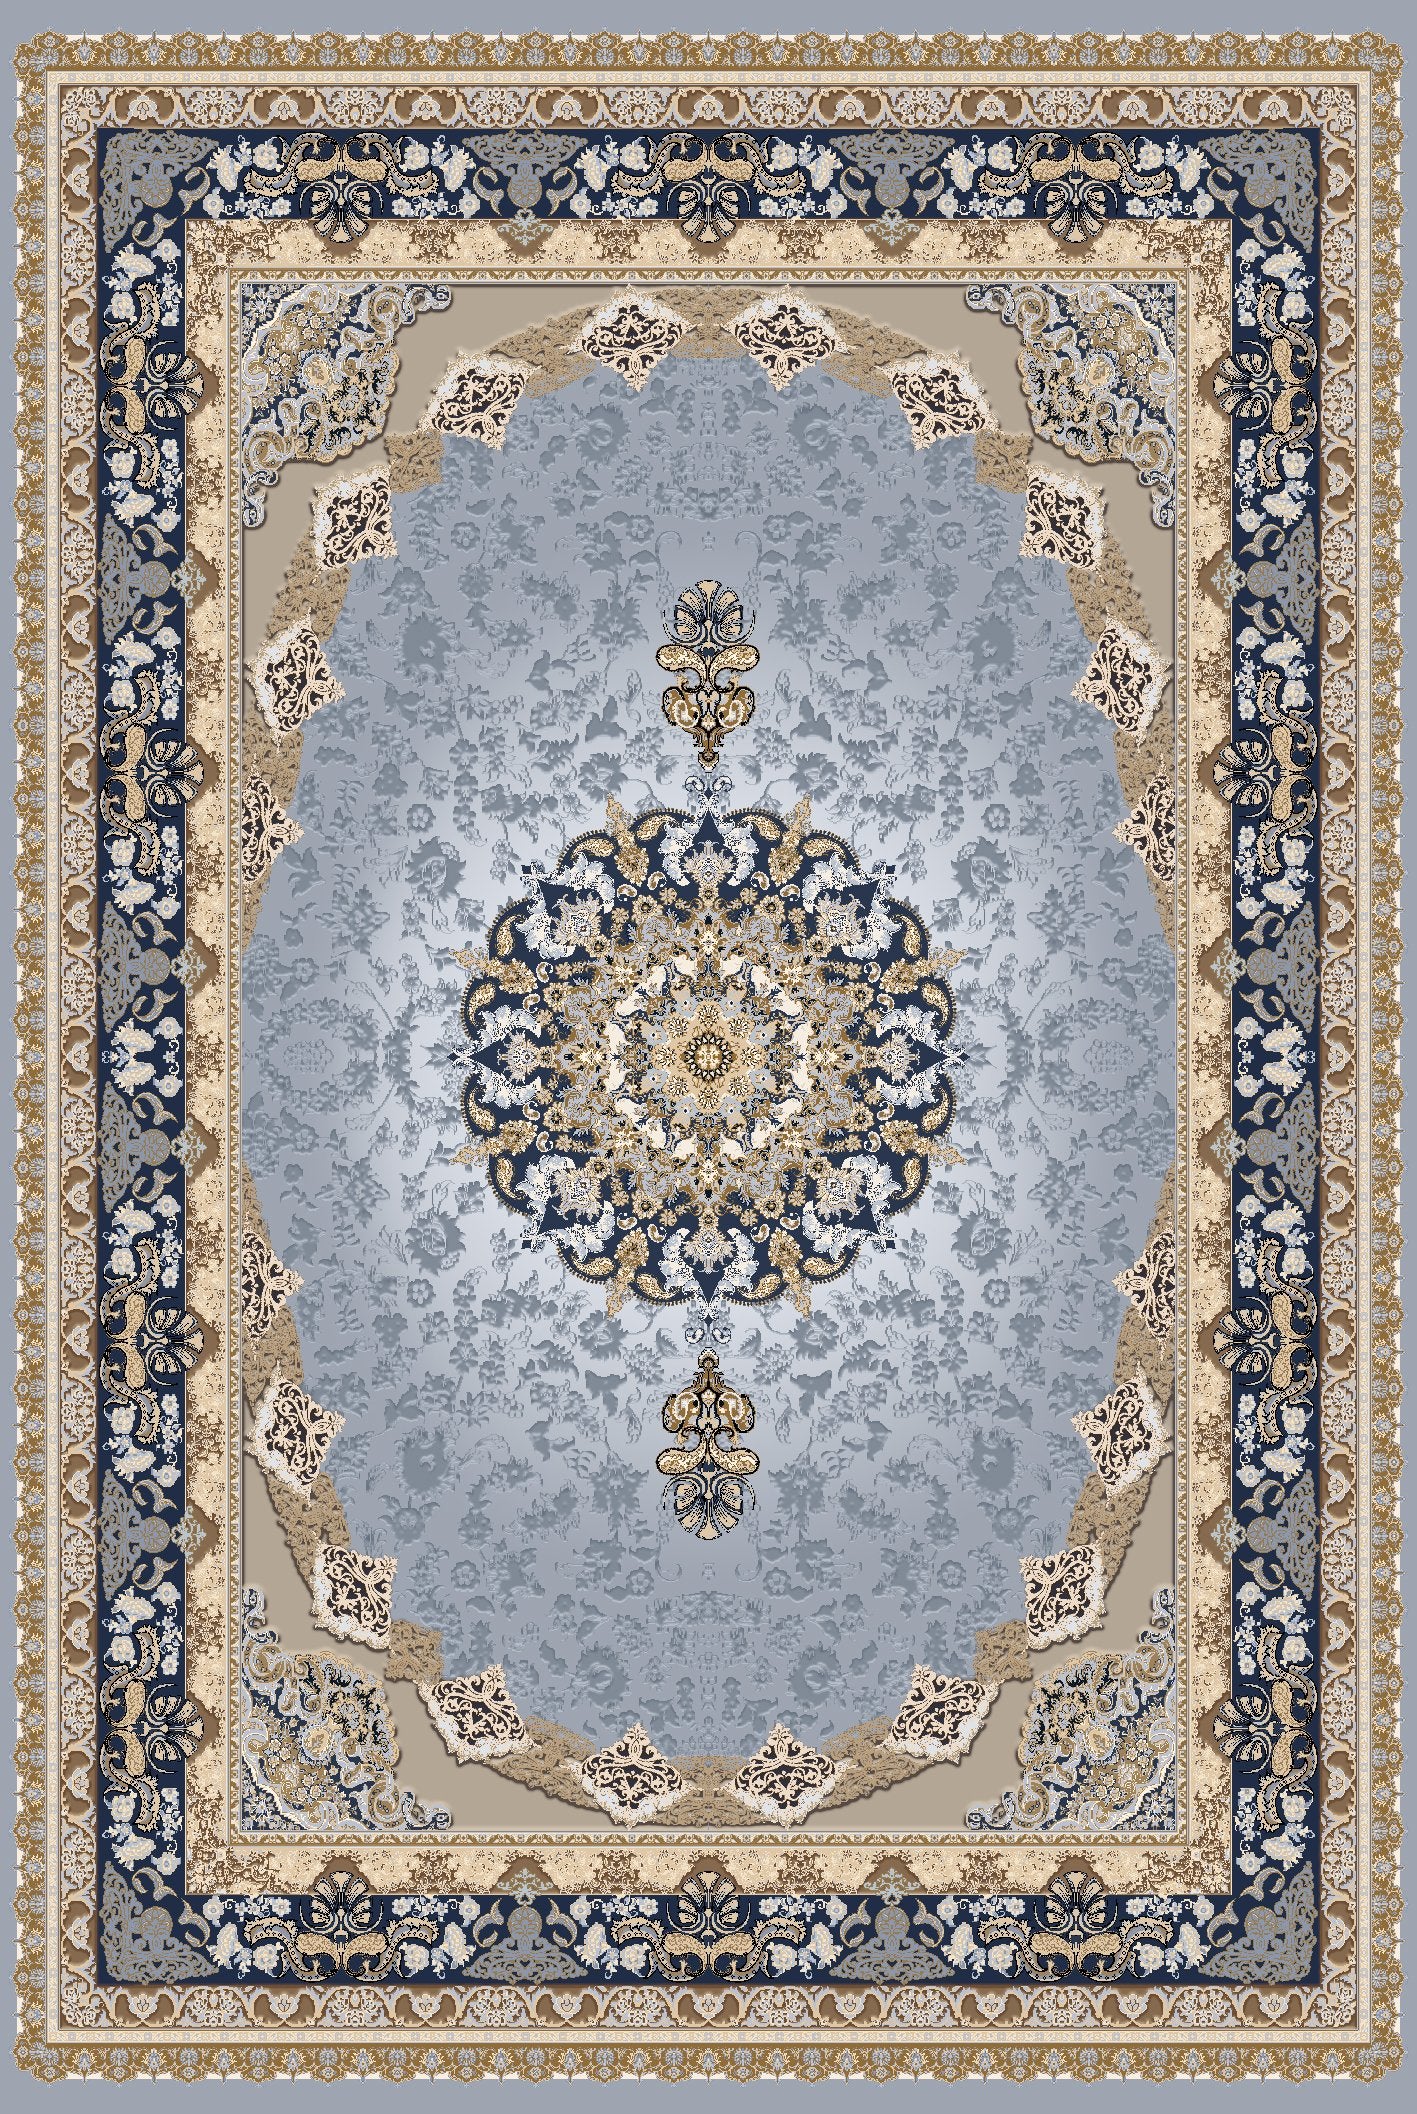 persian blue and beige flat pile area rug 5x7, 5x8 ft Contemporary, Living Room Carpet, Bedroom, Home Office